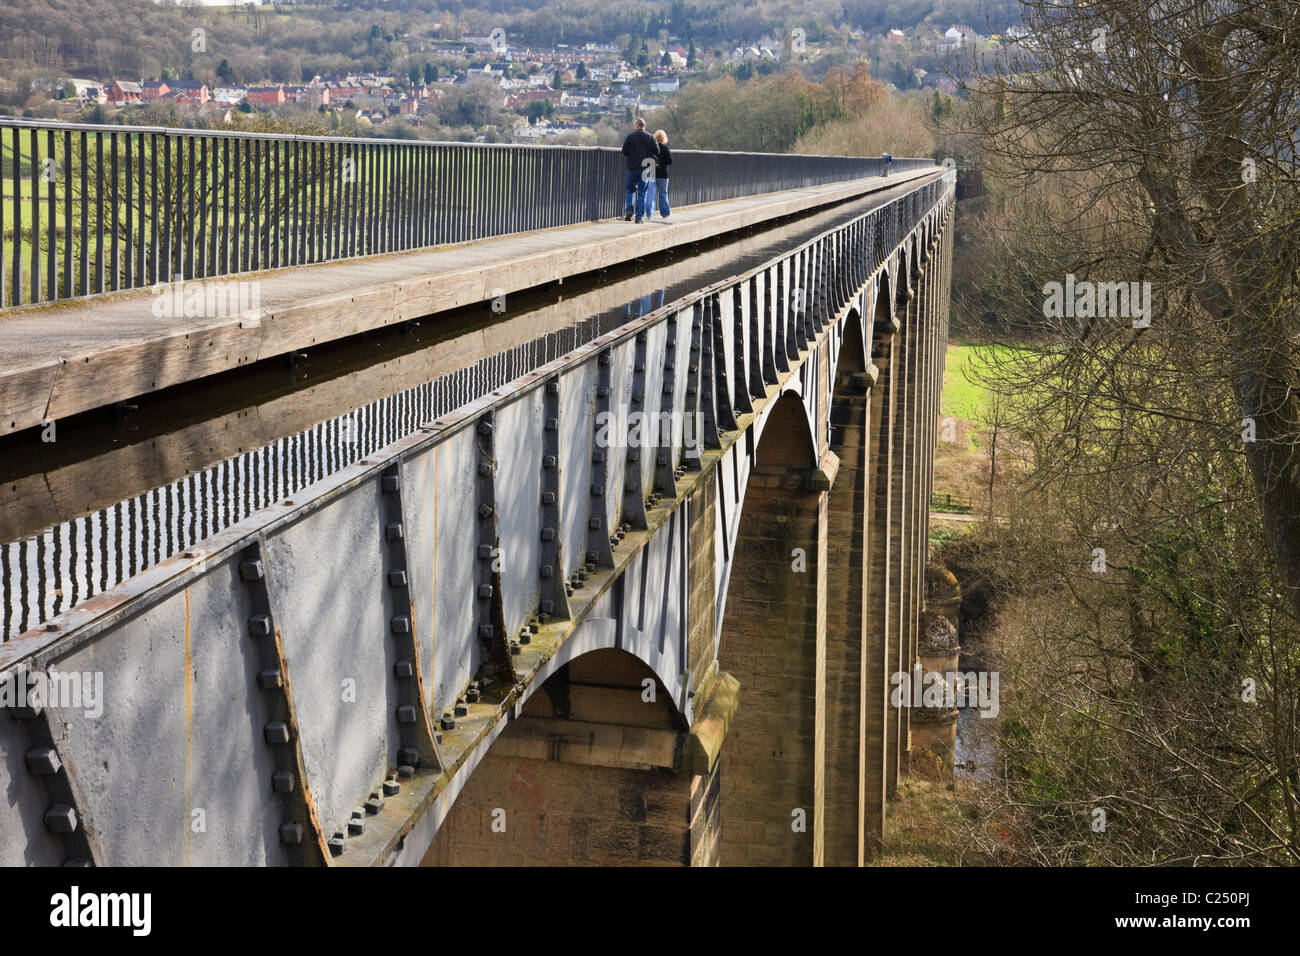 Pontcysyllte Aqueduct carrying the Llangollen canal with people walking on Offa's Dyke path. Trevor, Wrexham, North Wales, UK, Britain Stock Photo